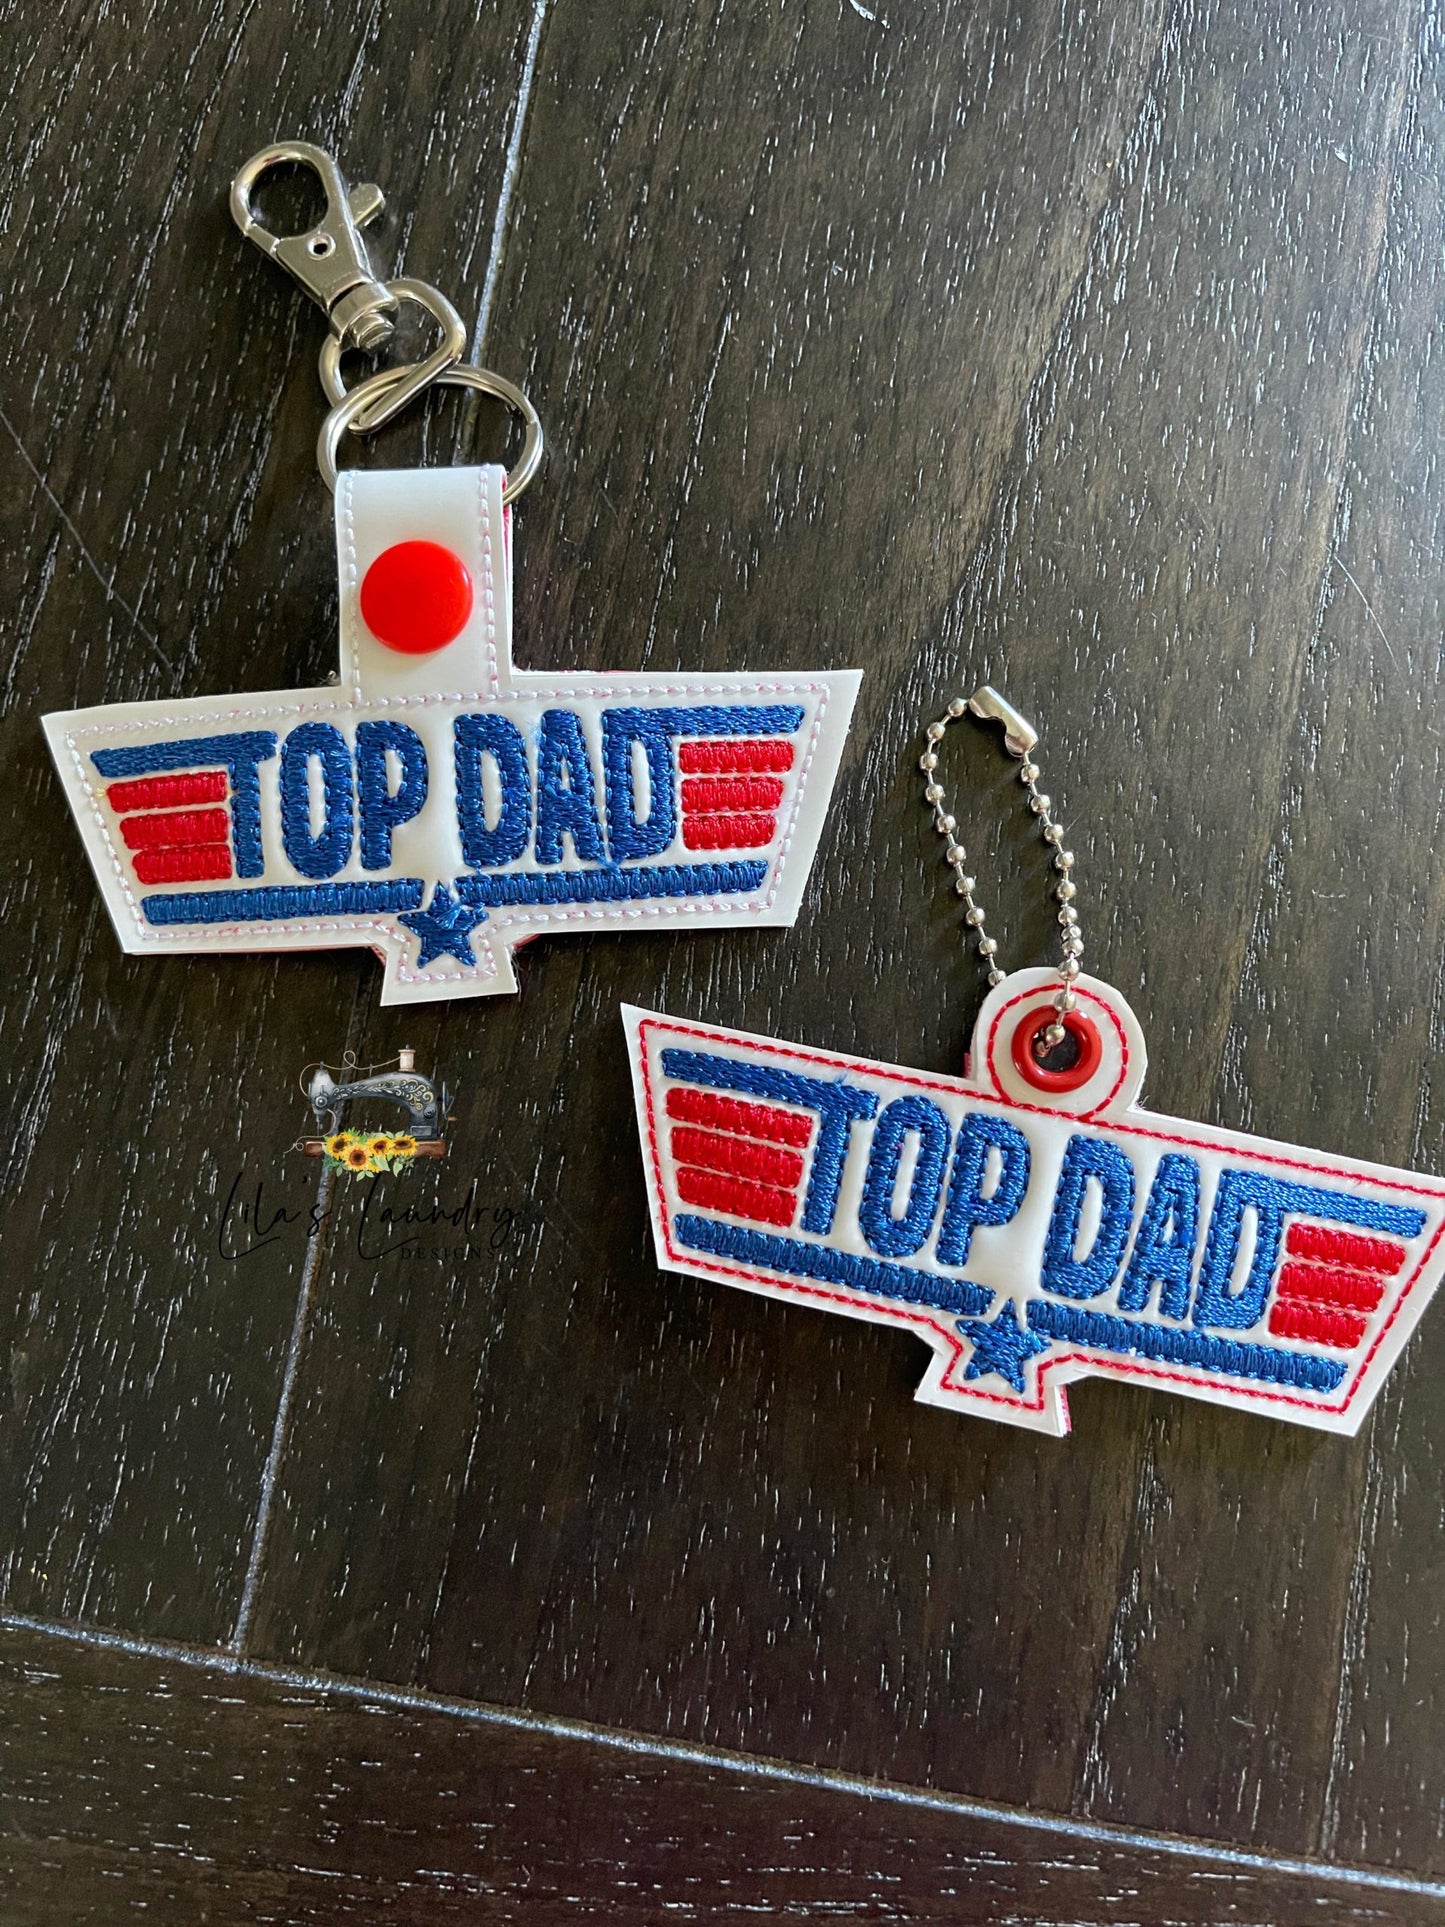 Top Dad Fobs - DIGITAL Embroidery DESIGN